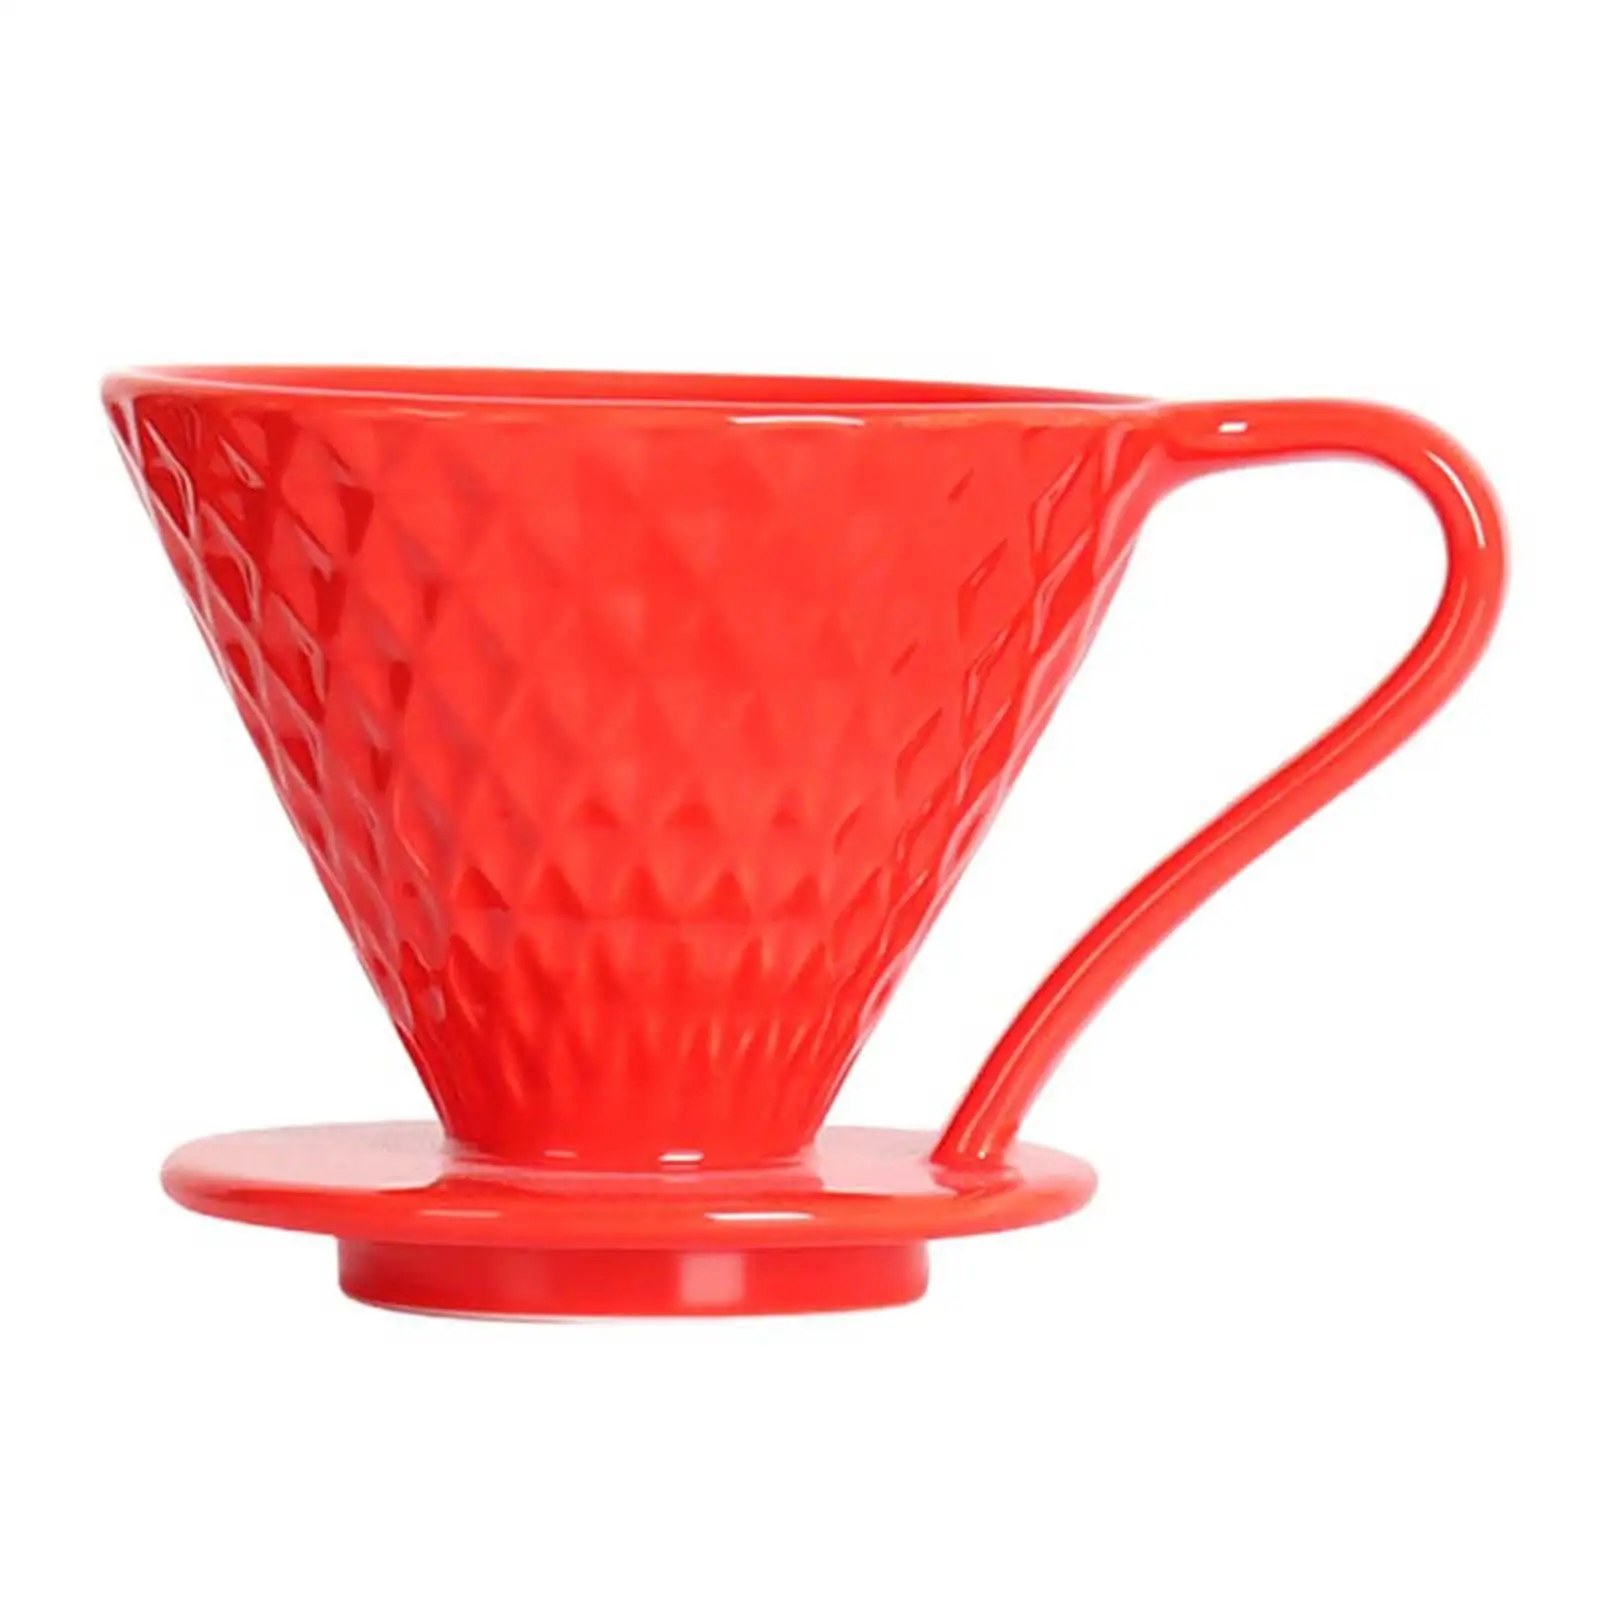 Coffee Filter Cup Strong Flavor Brewer Fits All Coffee Cups and Mugs Easy to Pour over Coffee Filter for Travel